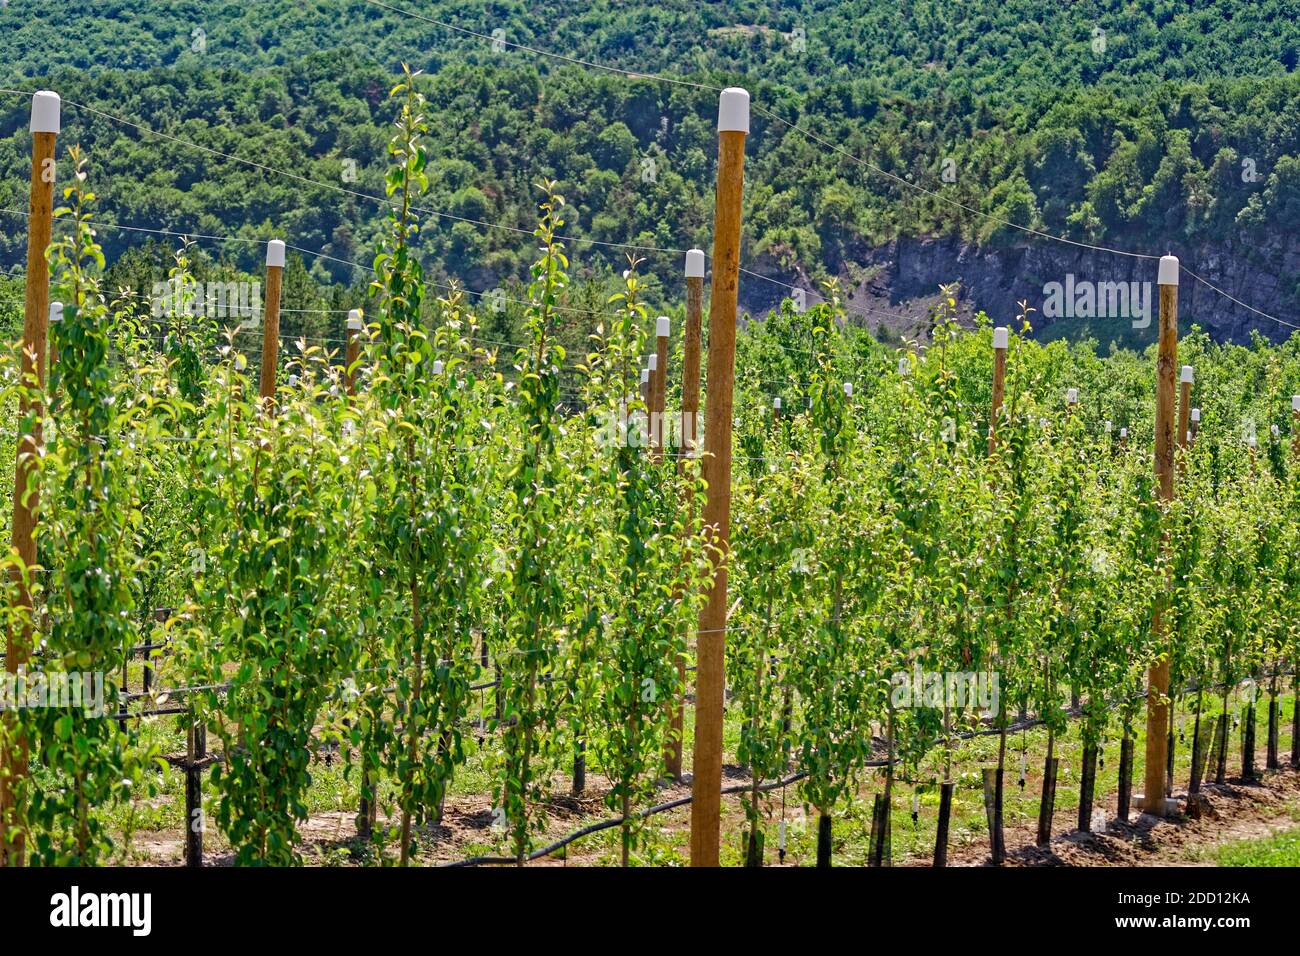 Fruit trees with netting poles for use of cover nets to keep birds off when the fruit appears. Stock Photo